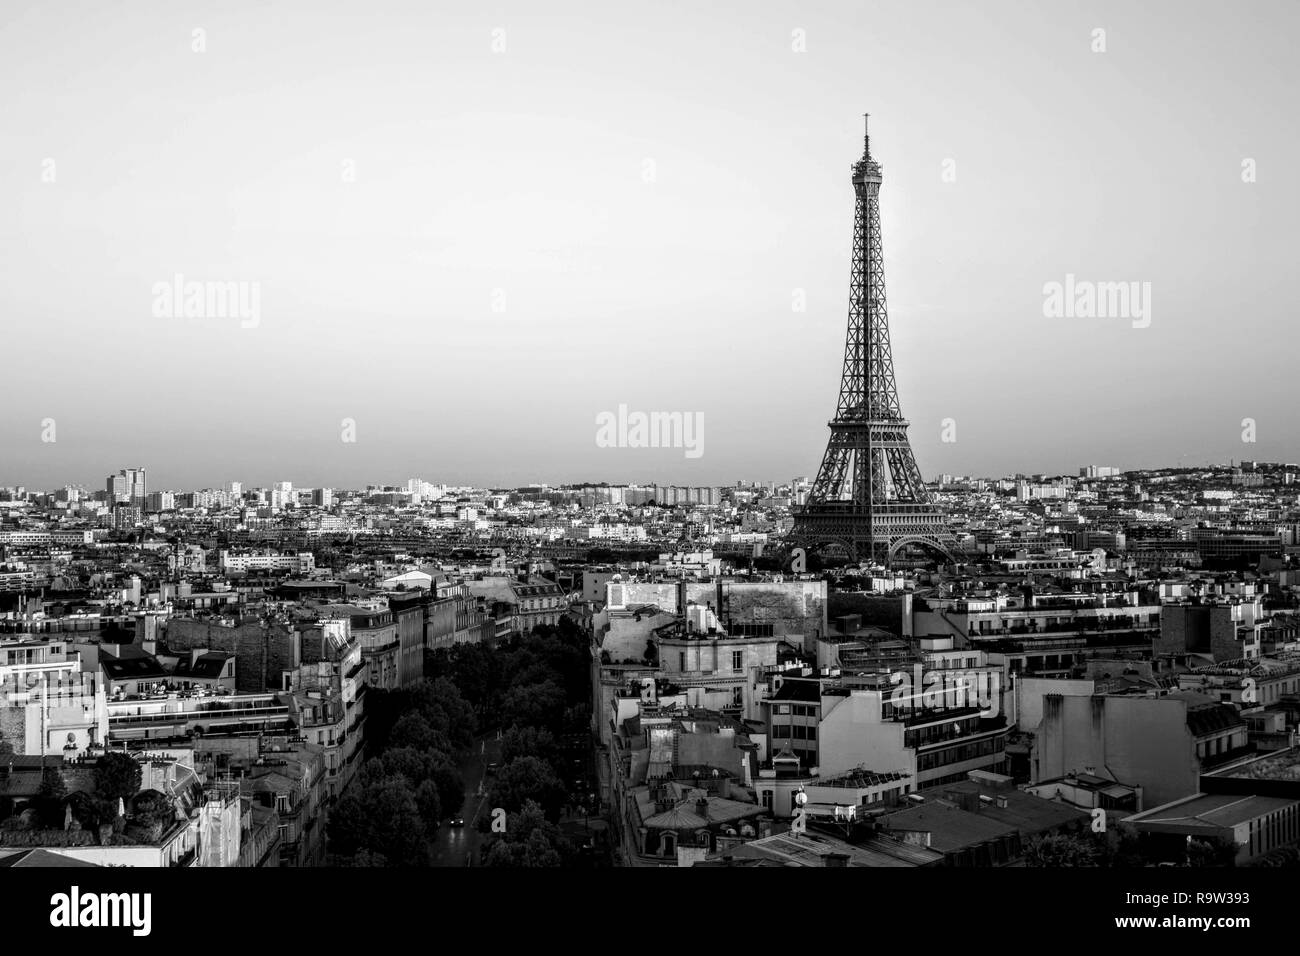 A view of the Eiffel Tower in Paris from the top of the Arc de Triomphe black and white Stock Photo